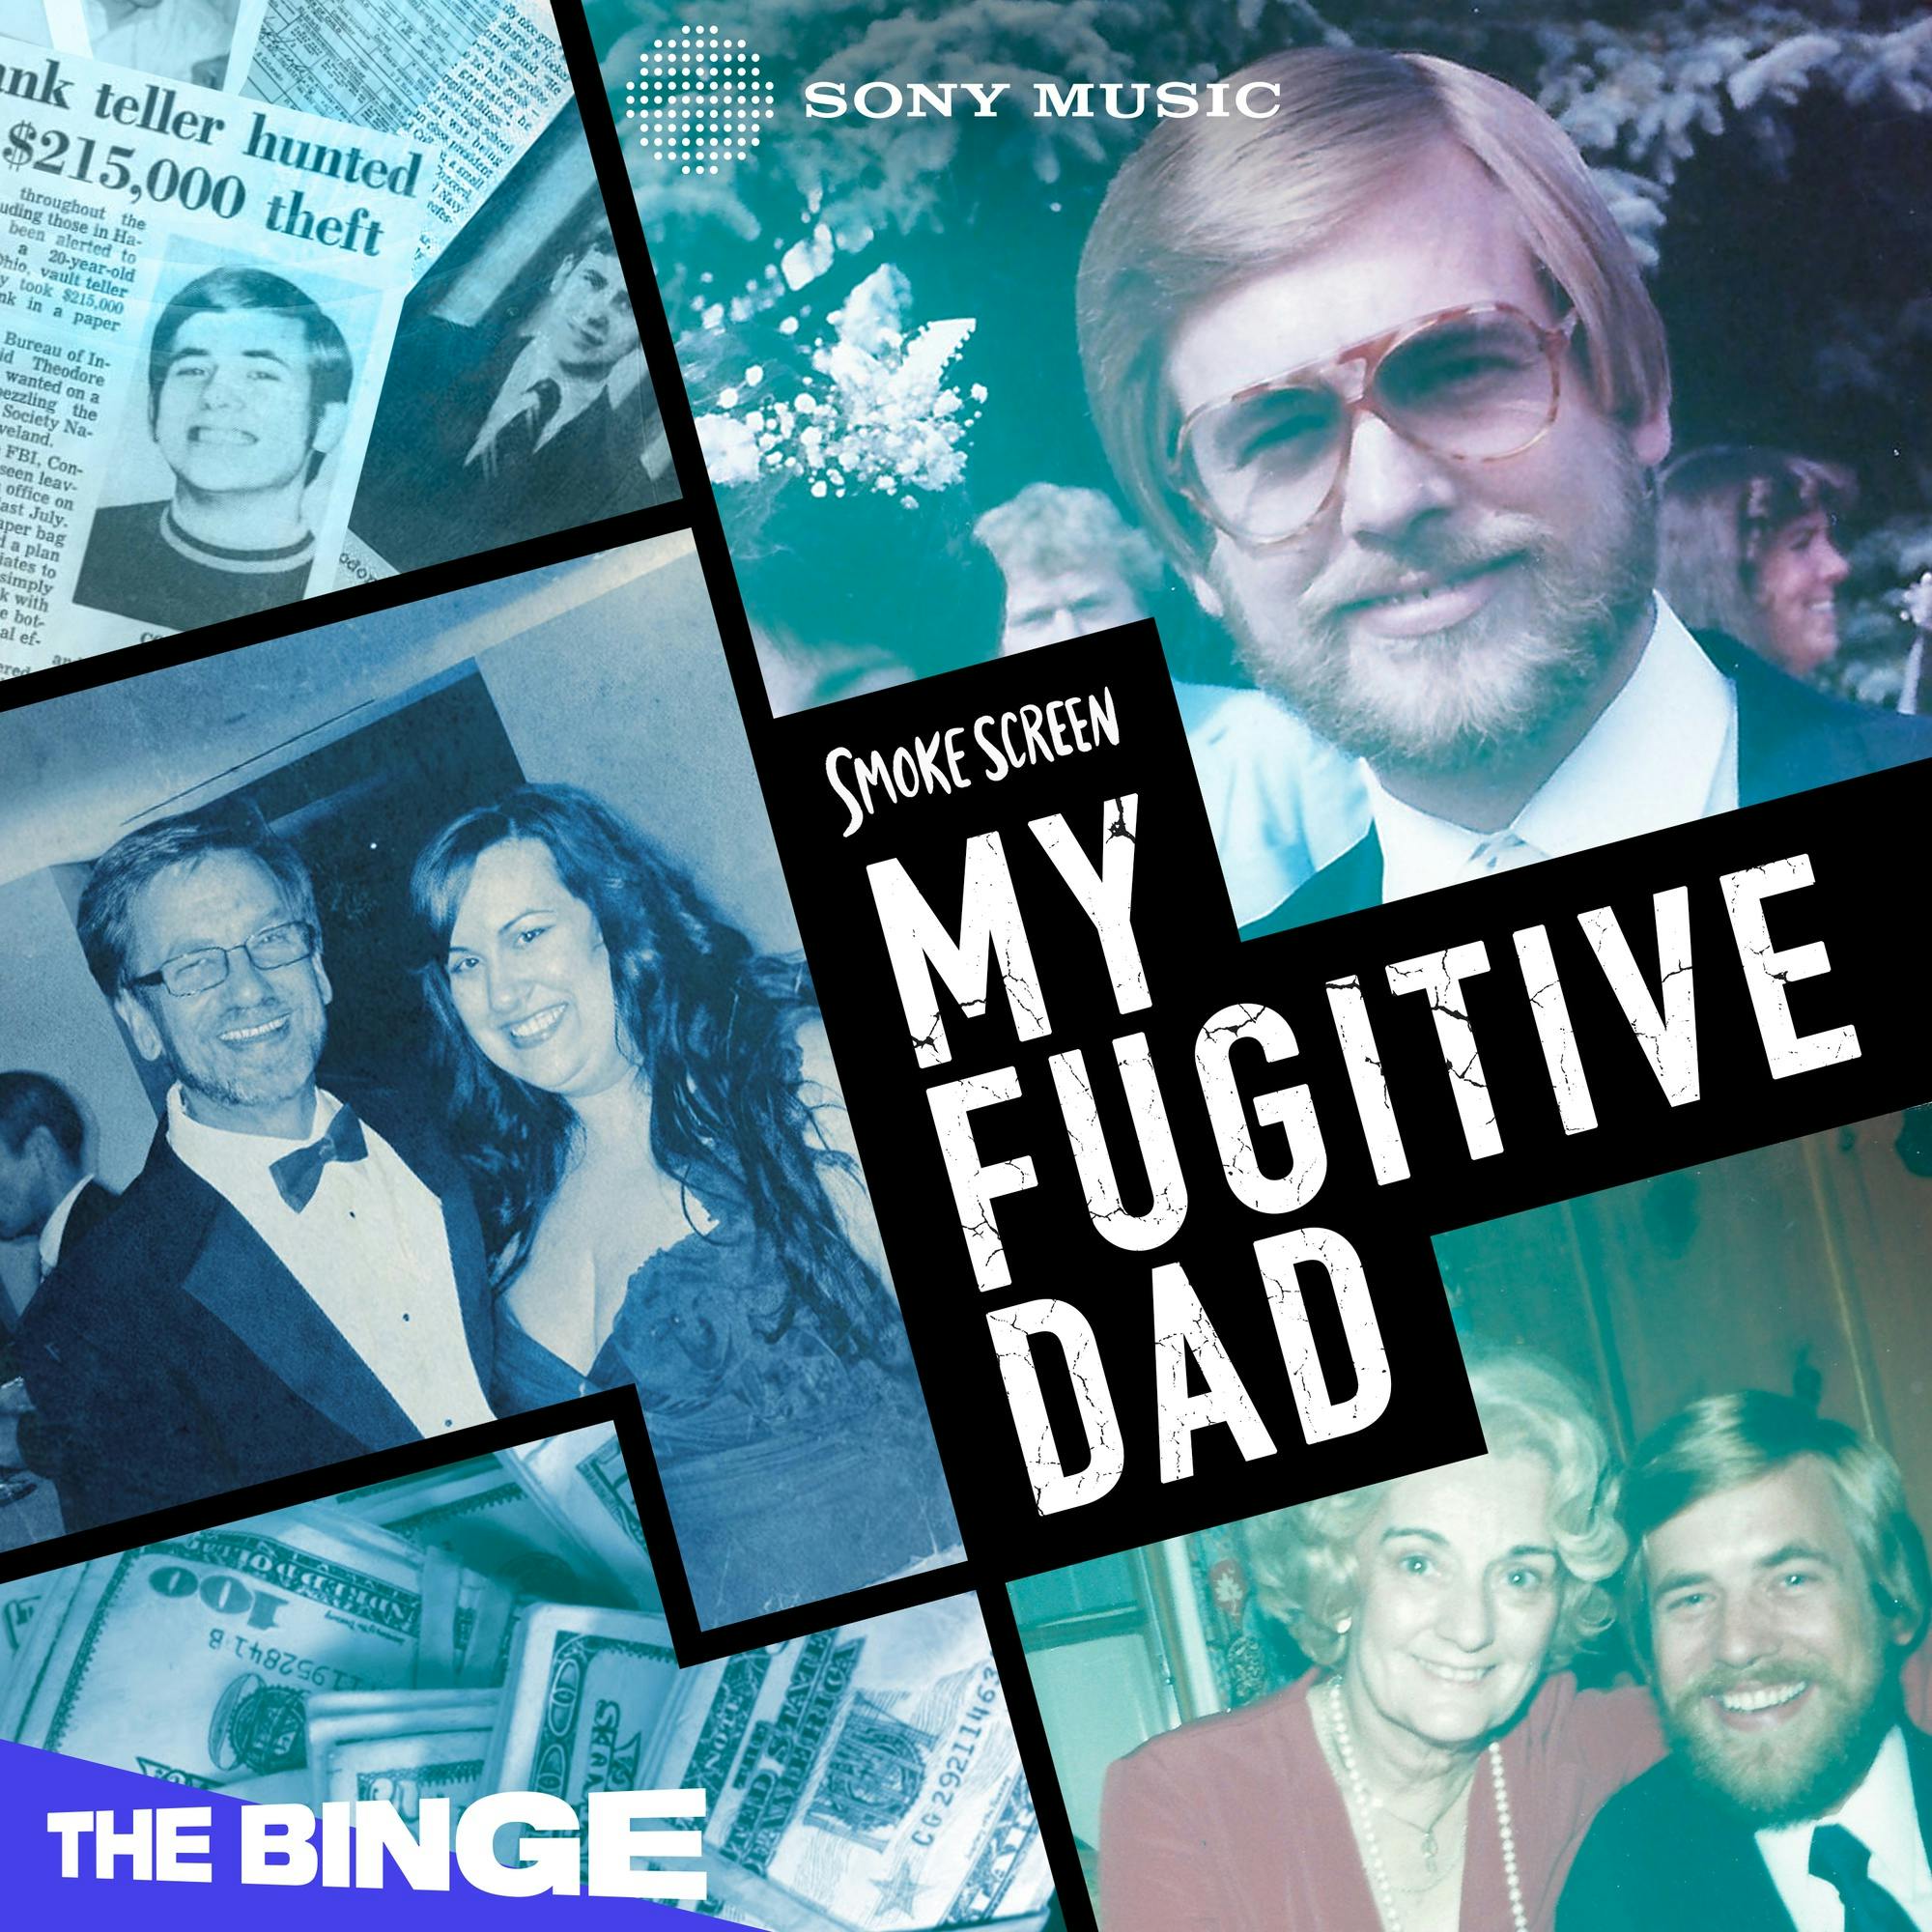 Smoke Screen: My Fugitive Dad podcast show image